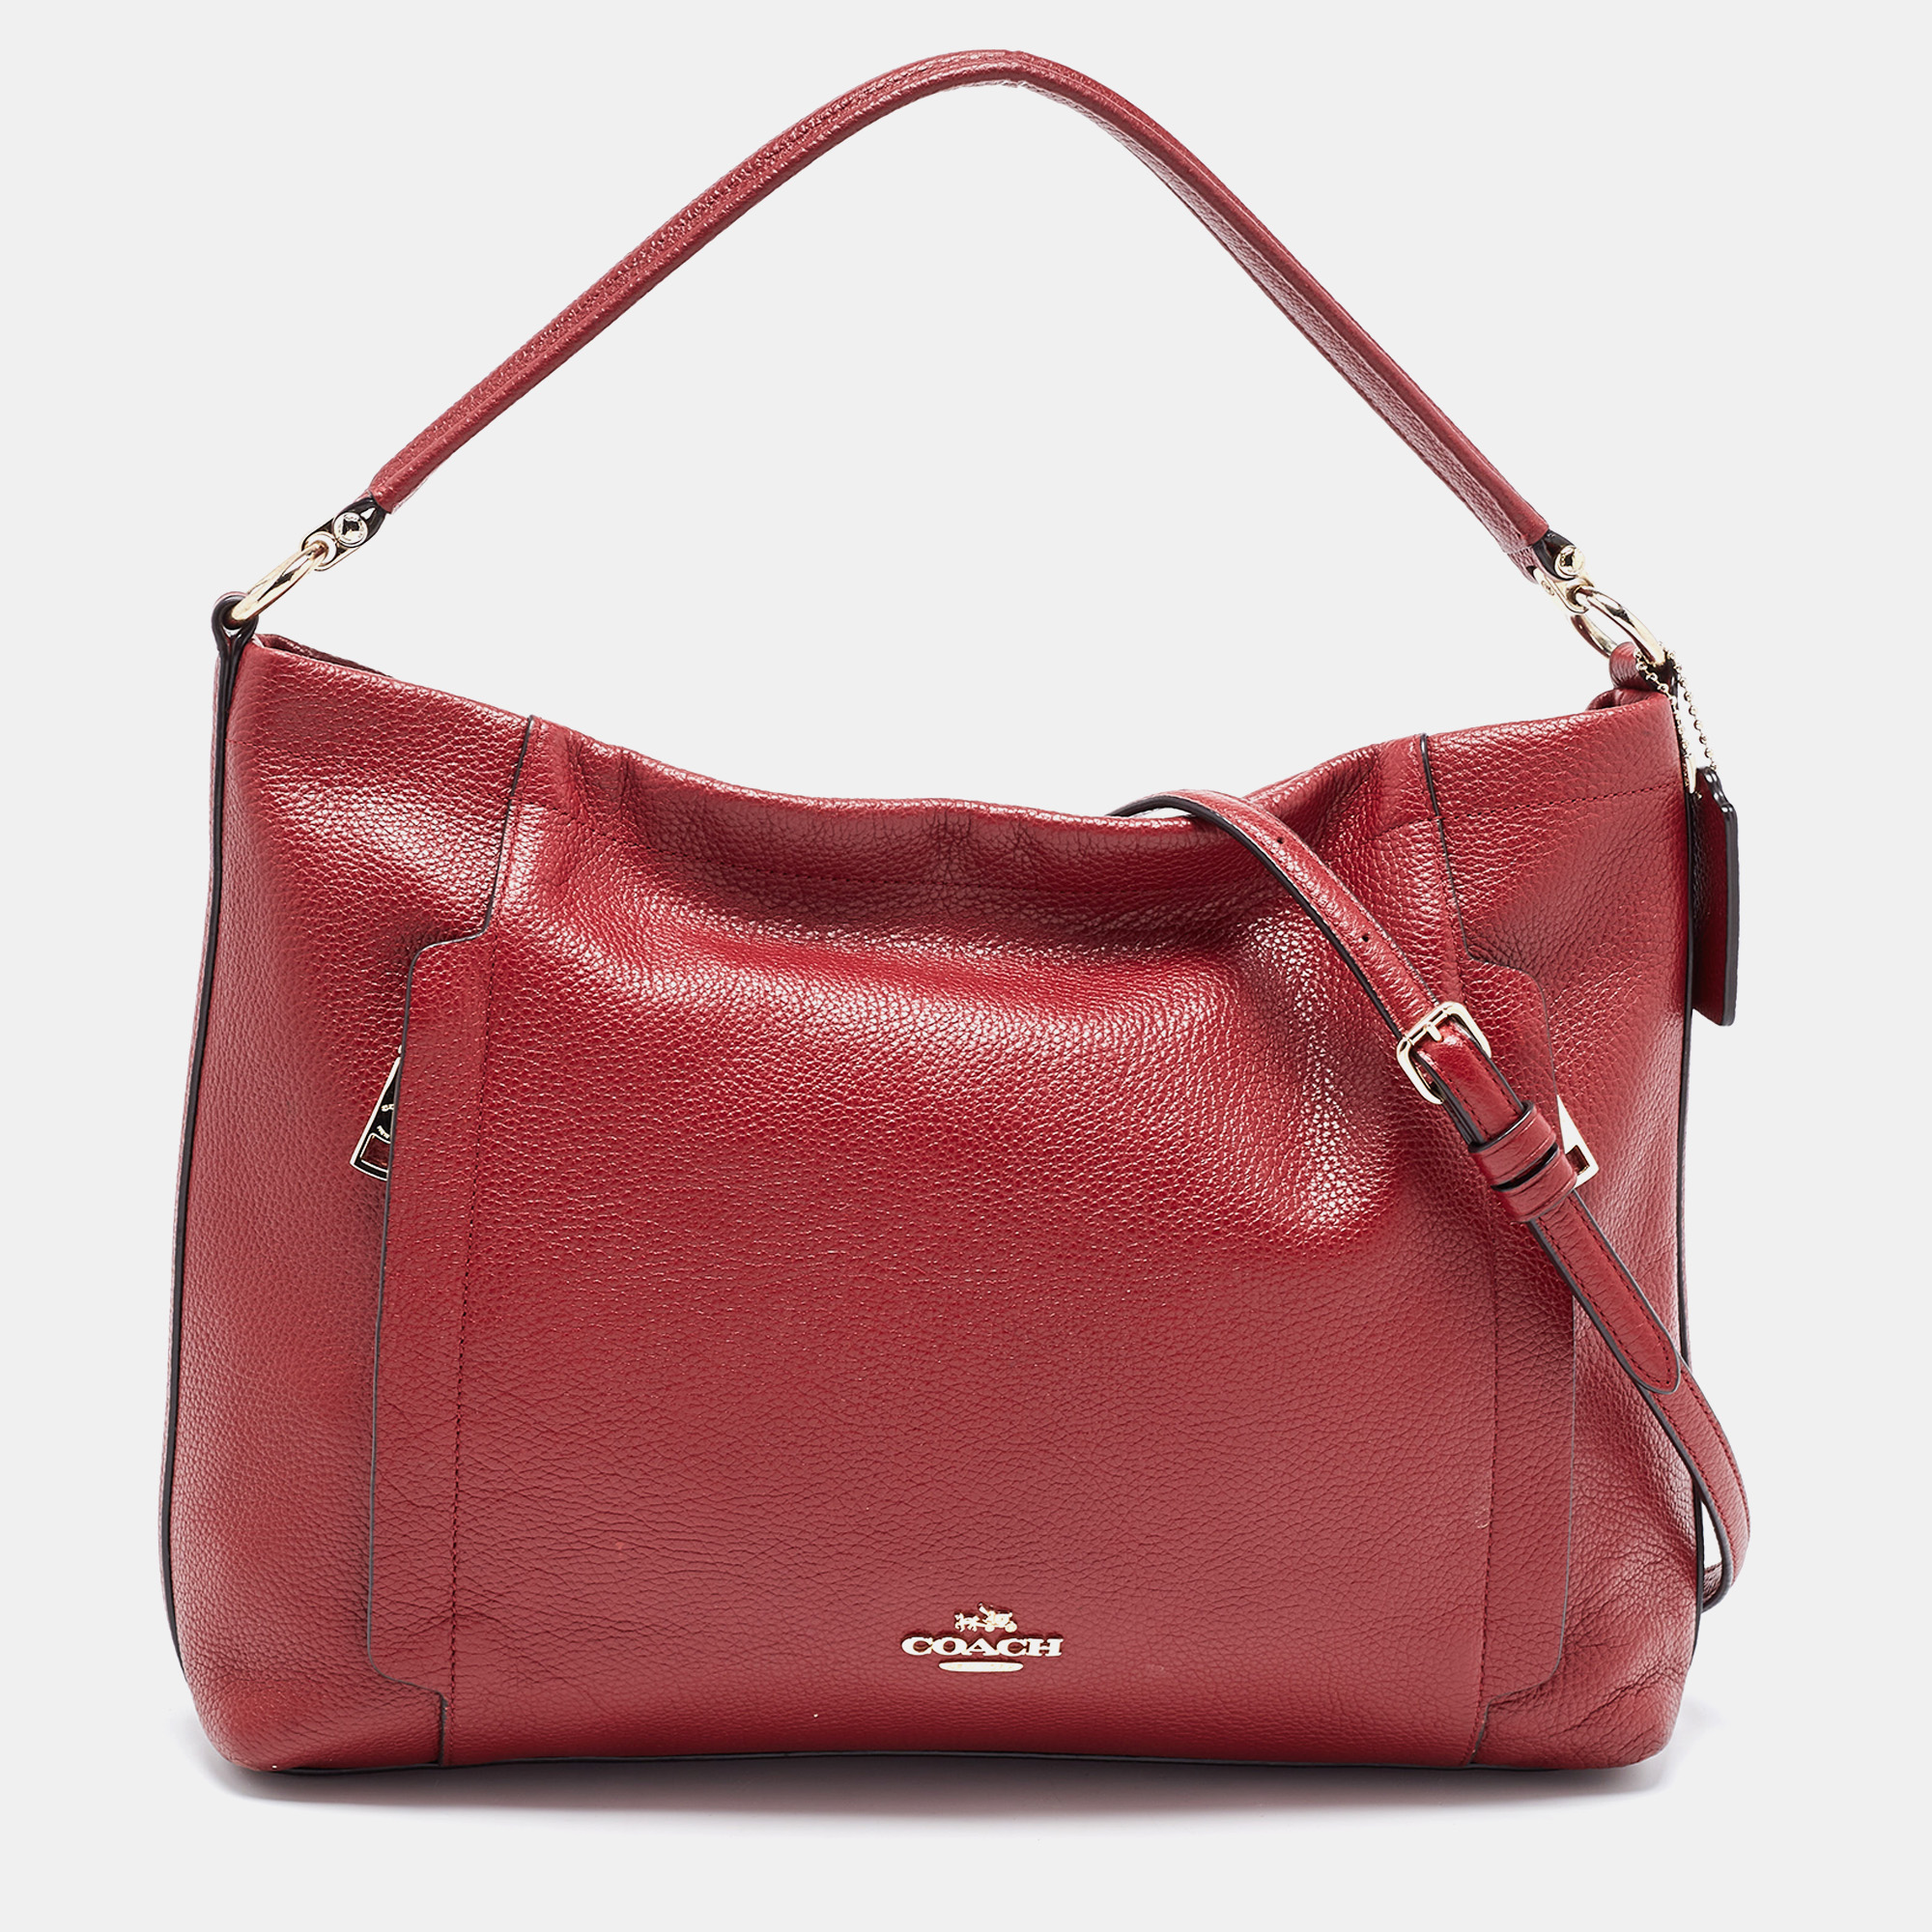 Pre-owned Coach Red Leather Marlon Hobo